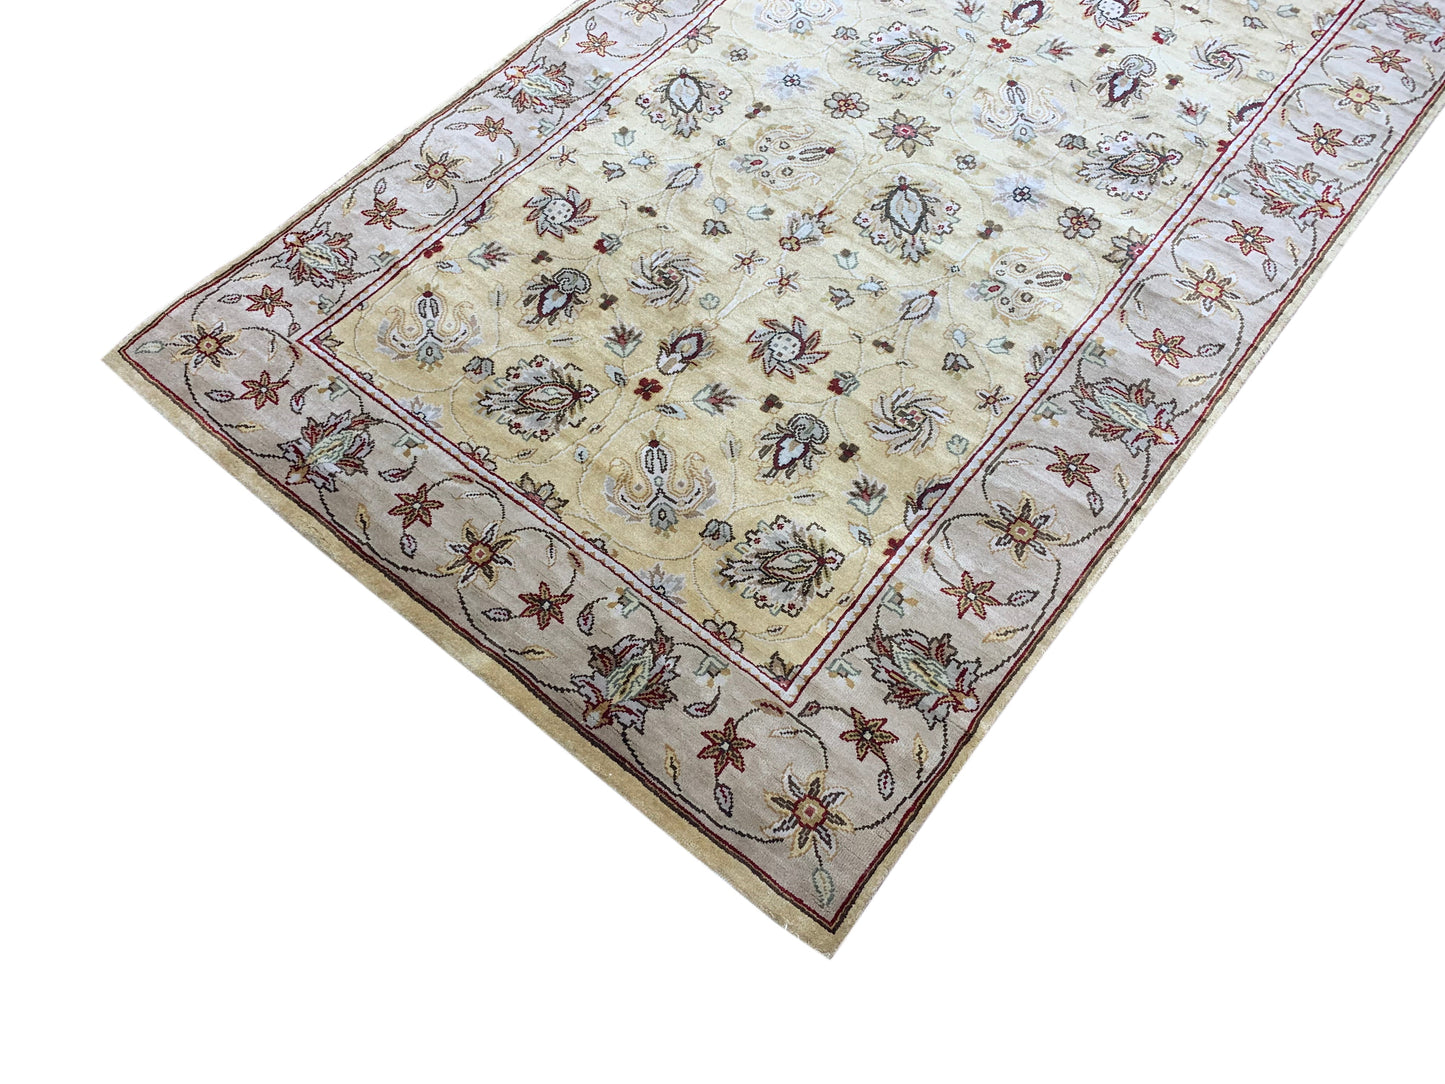 Get trendy with Yellow Ivory Pure Silk Traditional Luxurious Handknotted Area Rug 3.0x5.2ft 92x156Cms - Traditional Rugs available at Jaipur Oriental Rugs. Grab yours for $1255.00 today!